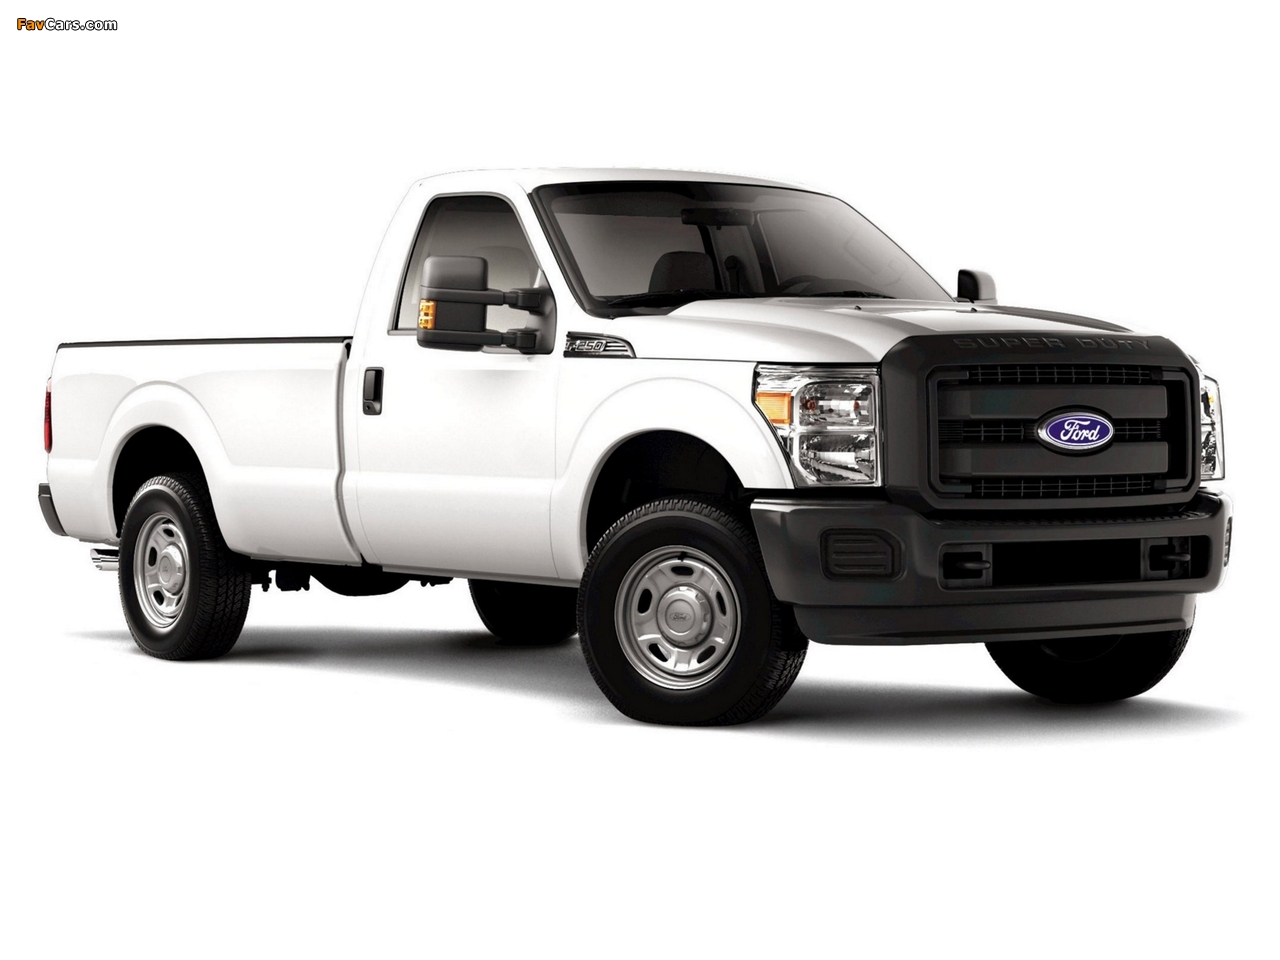 Ford F-250 Super Duty Regular Cab 2010 pictures (1280 x 960)